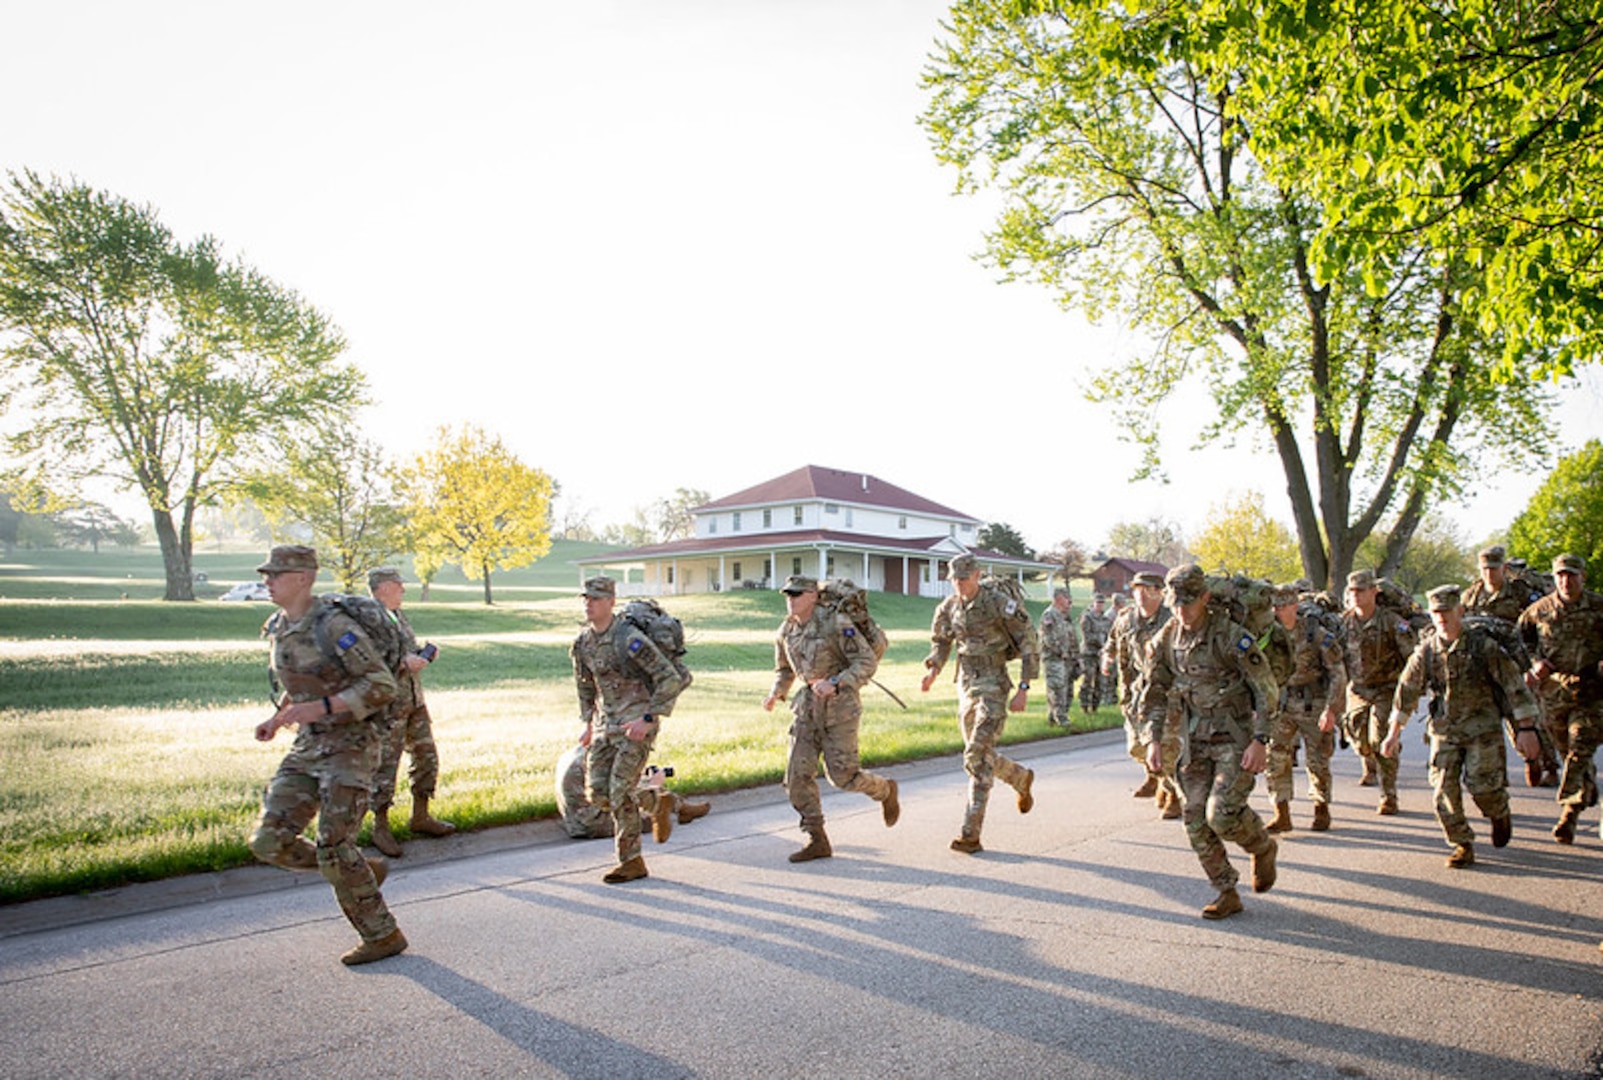 Spc. Tevin Kenton, from the Wisconsin Army National Guard’s Troop C, 1st Squadron, 105th Cavalry Regiment, leads the pack during a 12-mile ruck march May 5, the concluding event in the 2024 Region IV Best Warrior Competition at Camp Dodge, Iowa. Kenton took first place in the lower enlisted division and will represent Wisconsin at the national Best Warrior Competition this August in Vermont. 135th Mobile Public Affairs Detachment photo by Staff Sgt. Samantha Hircock